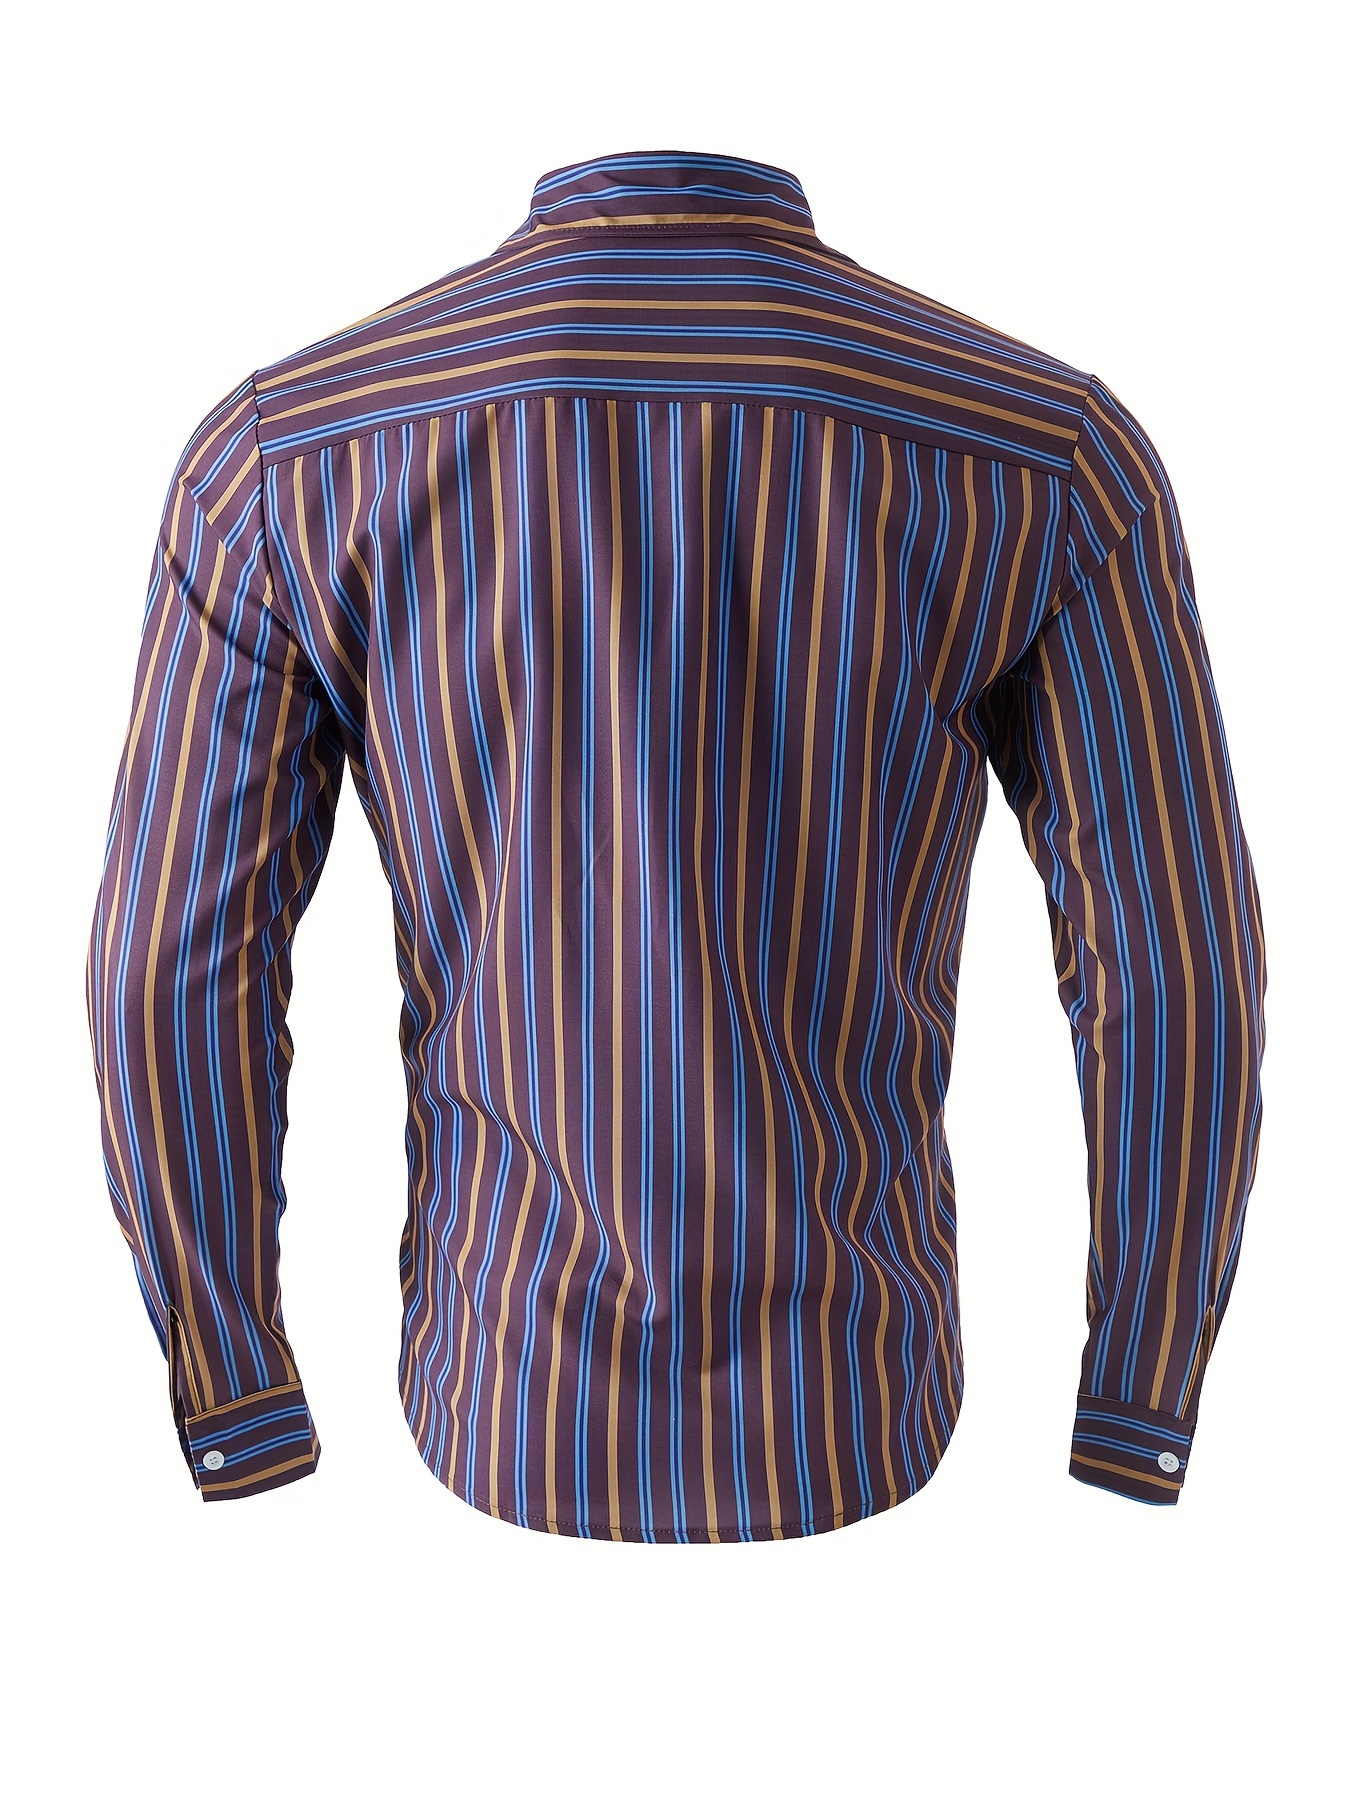 mens classic design striped long sleeve button up shirt for business occasions spring fall mens clothing details 6